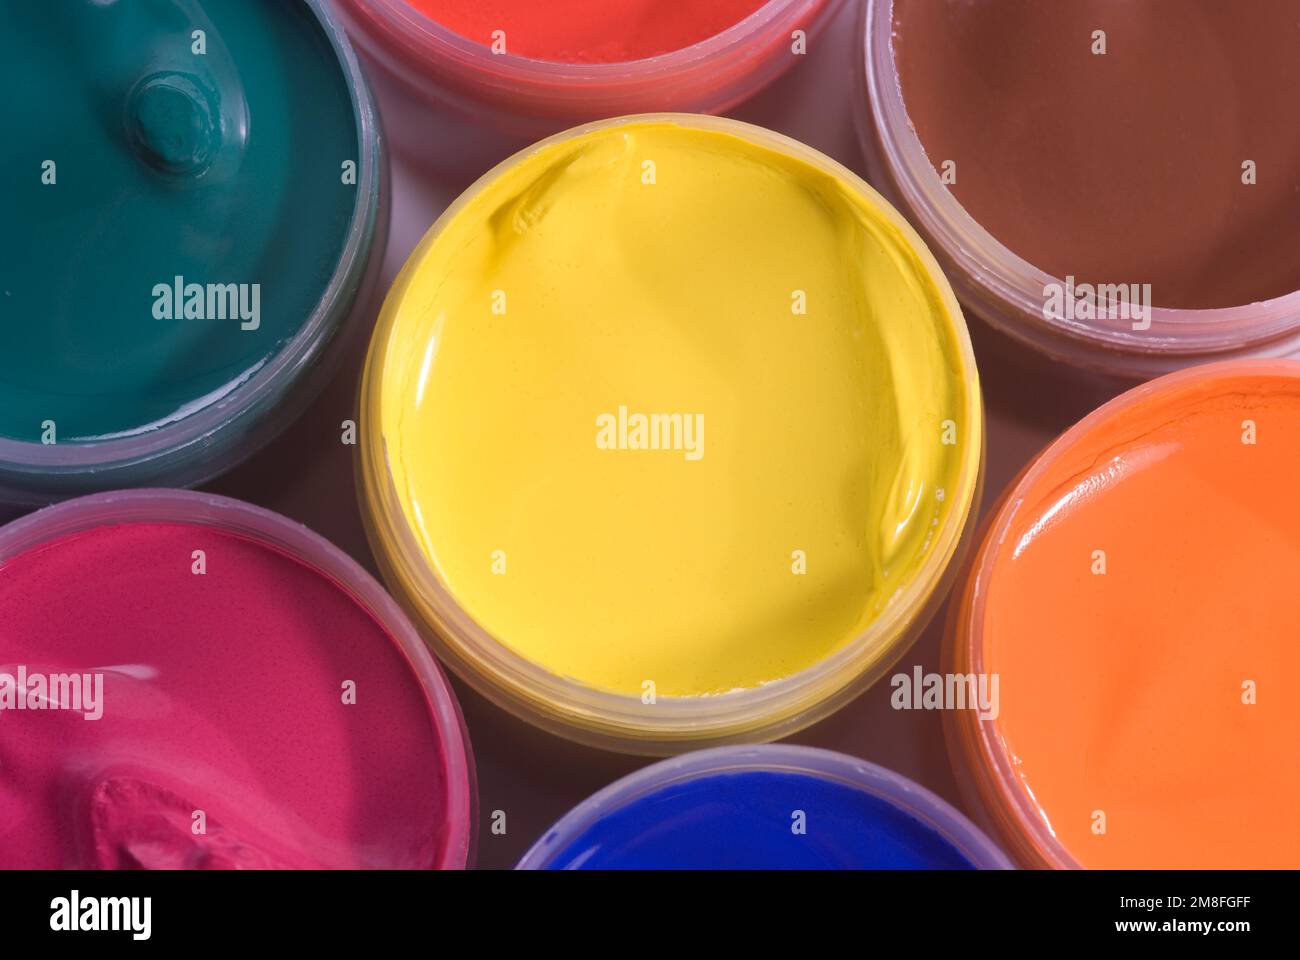 Gouache 8 Gouache Jars In A Row Colorful Gouache Paint Containersrainbow  Gouache And Piece Of White Paper Stock Photo - Download Image Now - iStock